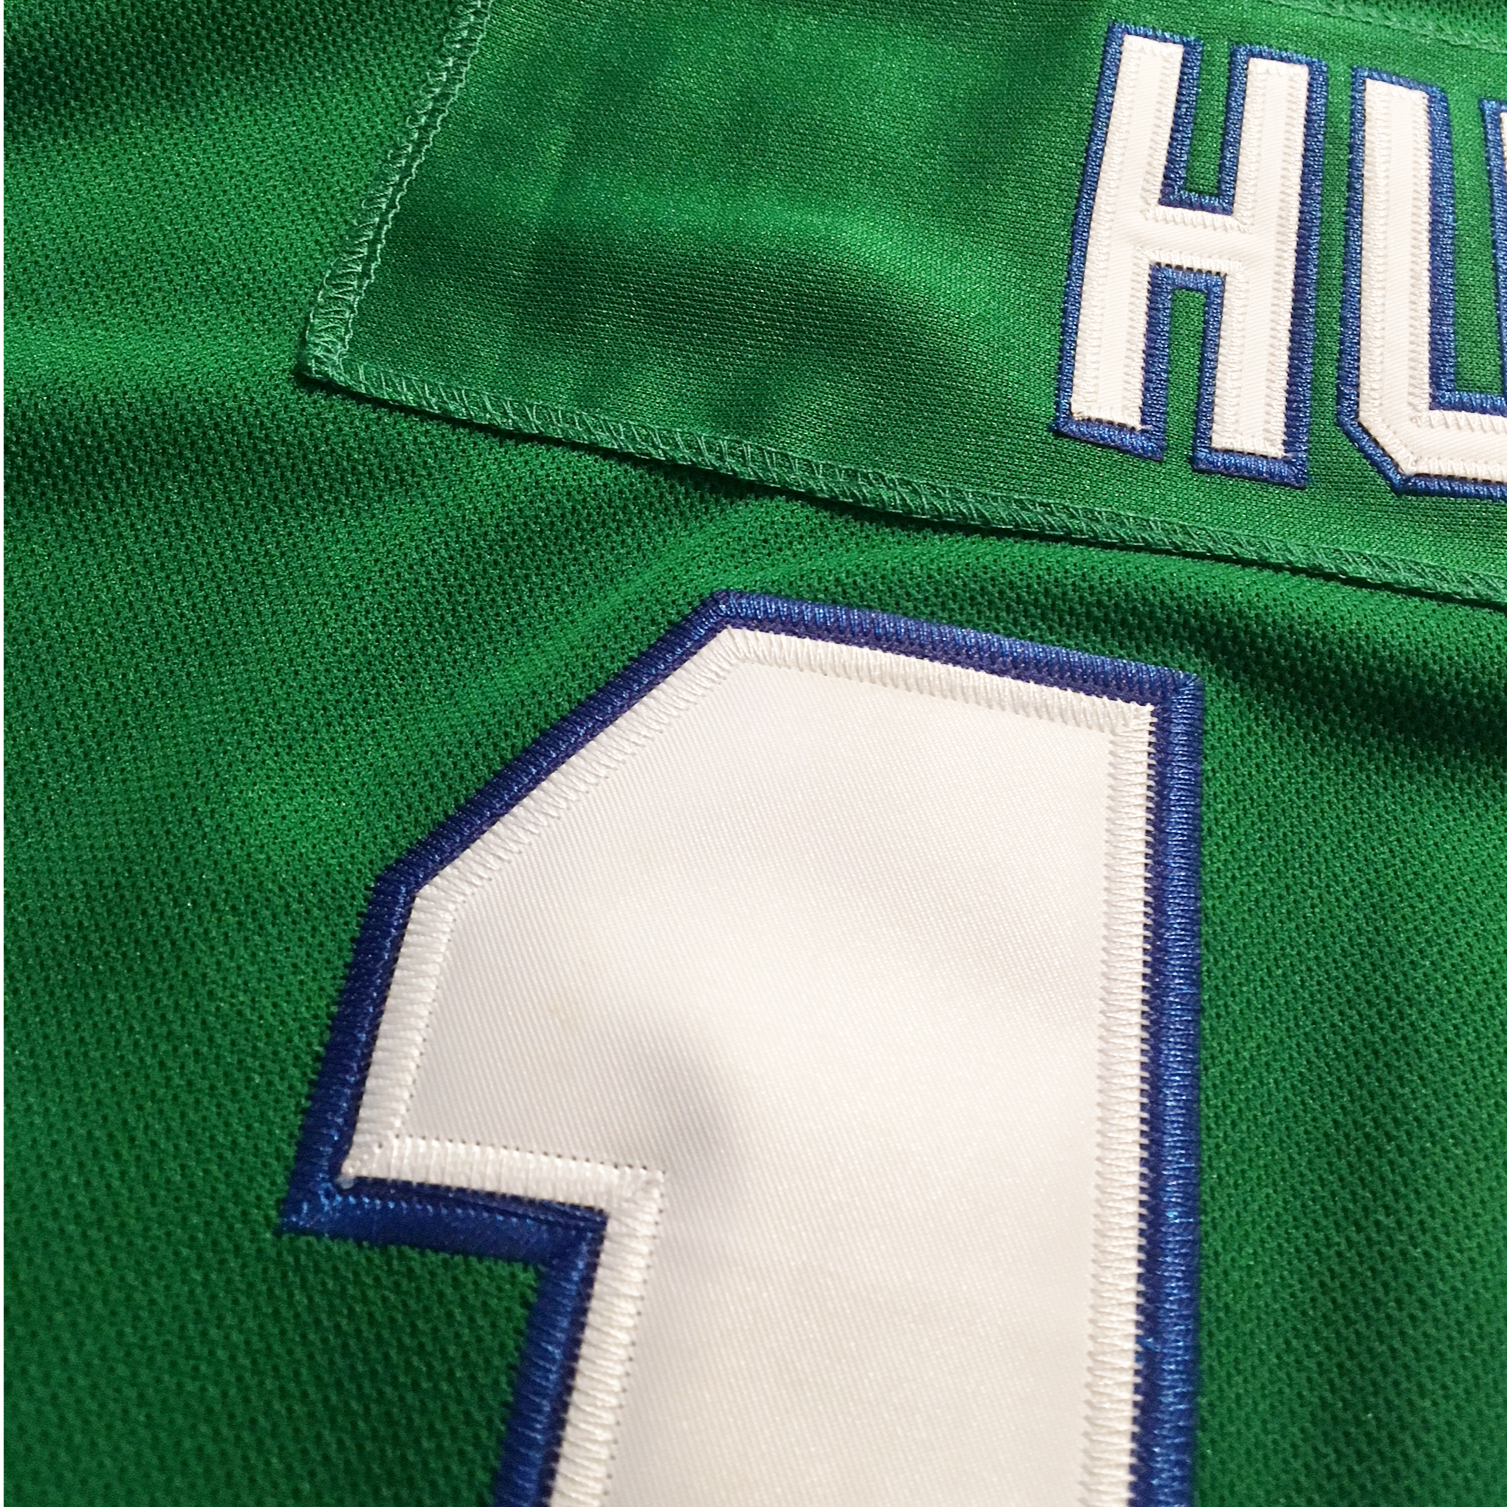 Personalized Hartford Whalers NHL hockey jersey - USALast